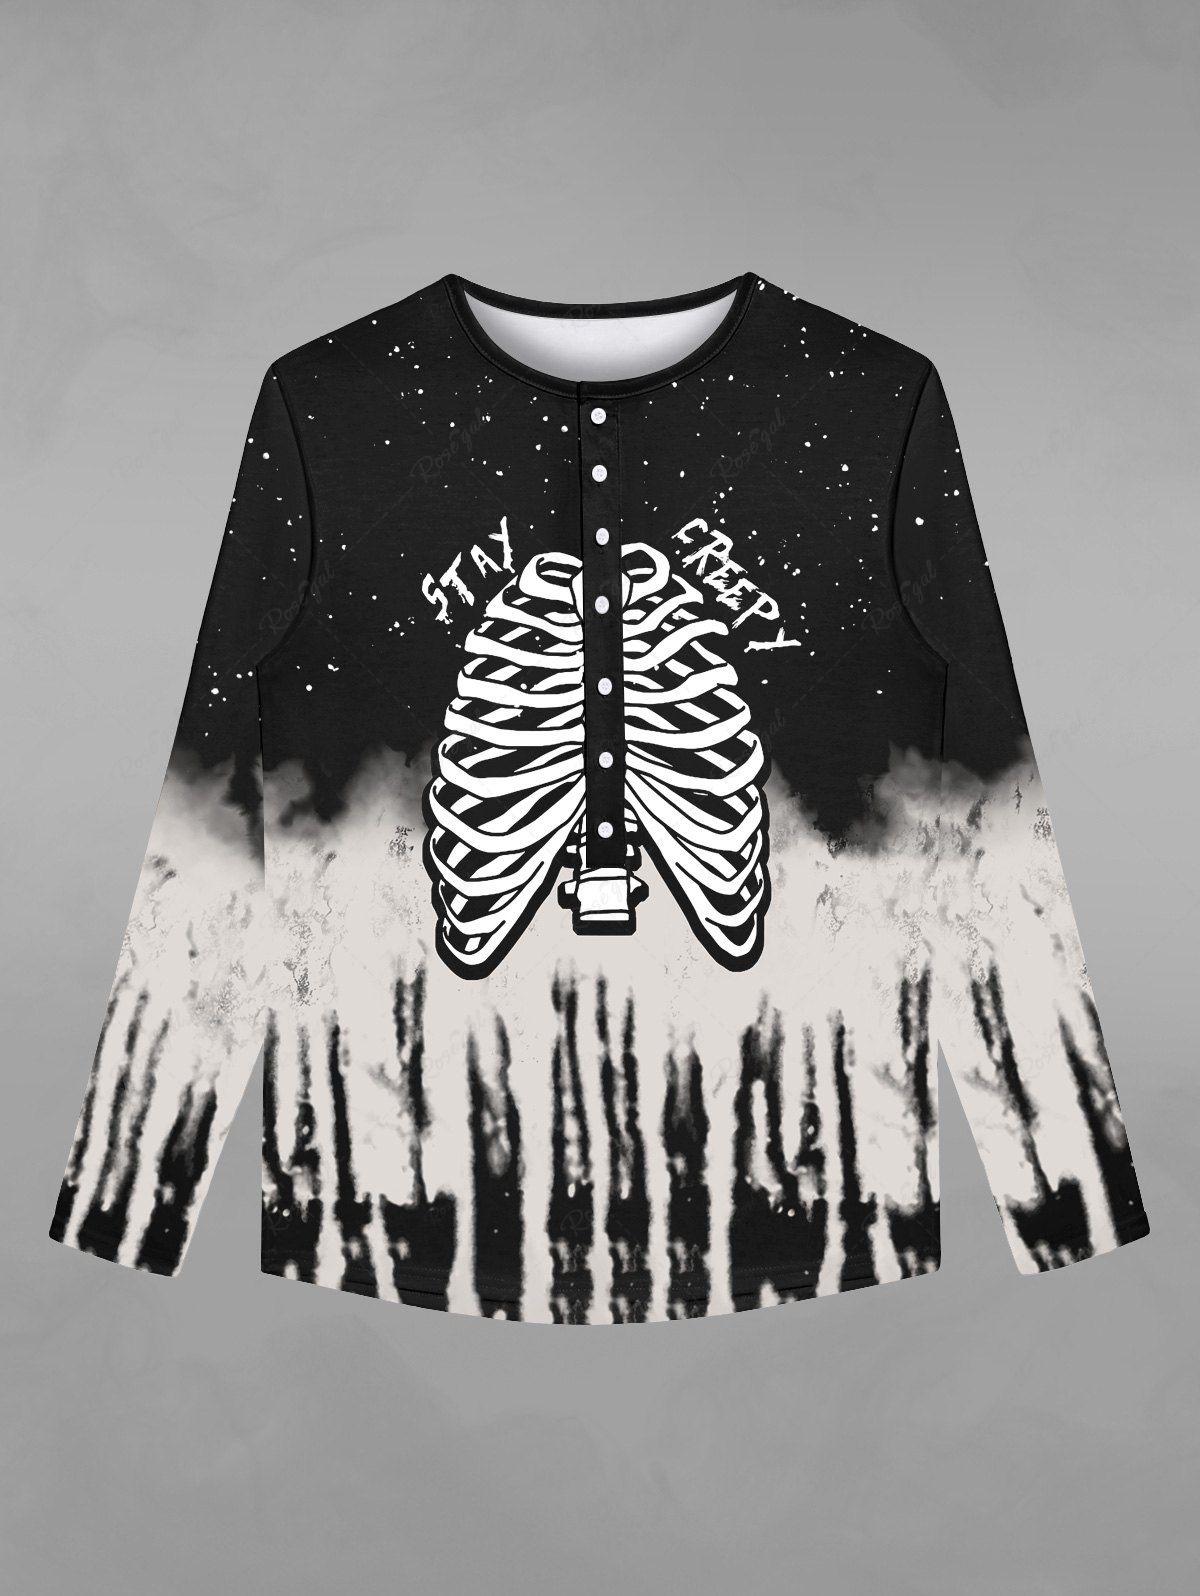 New Gothic Galaxy Skeleton Distressed Print Buttons Halloween T-shirt For Men  